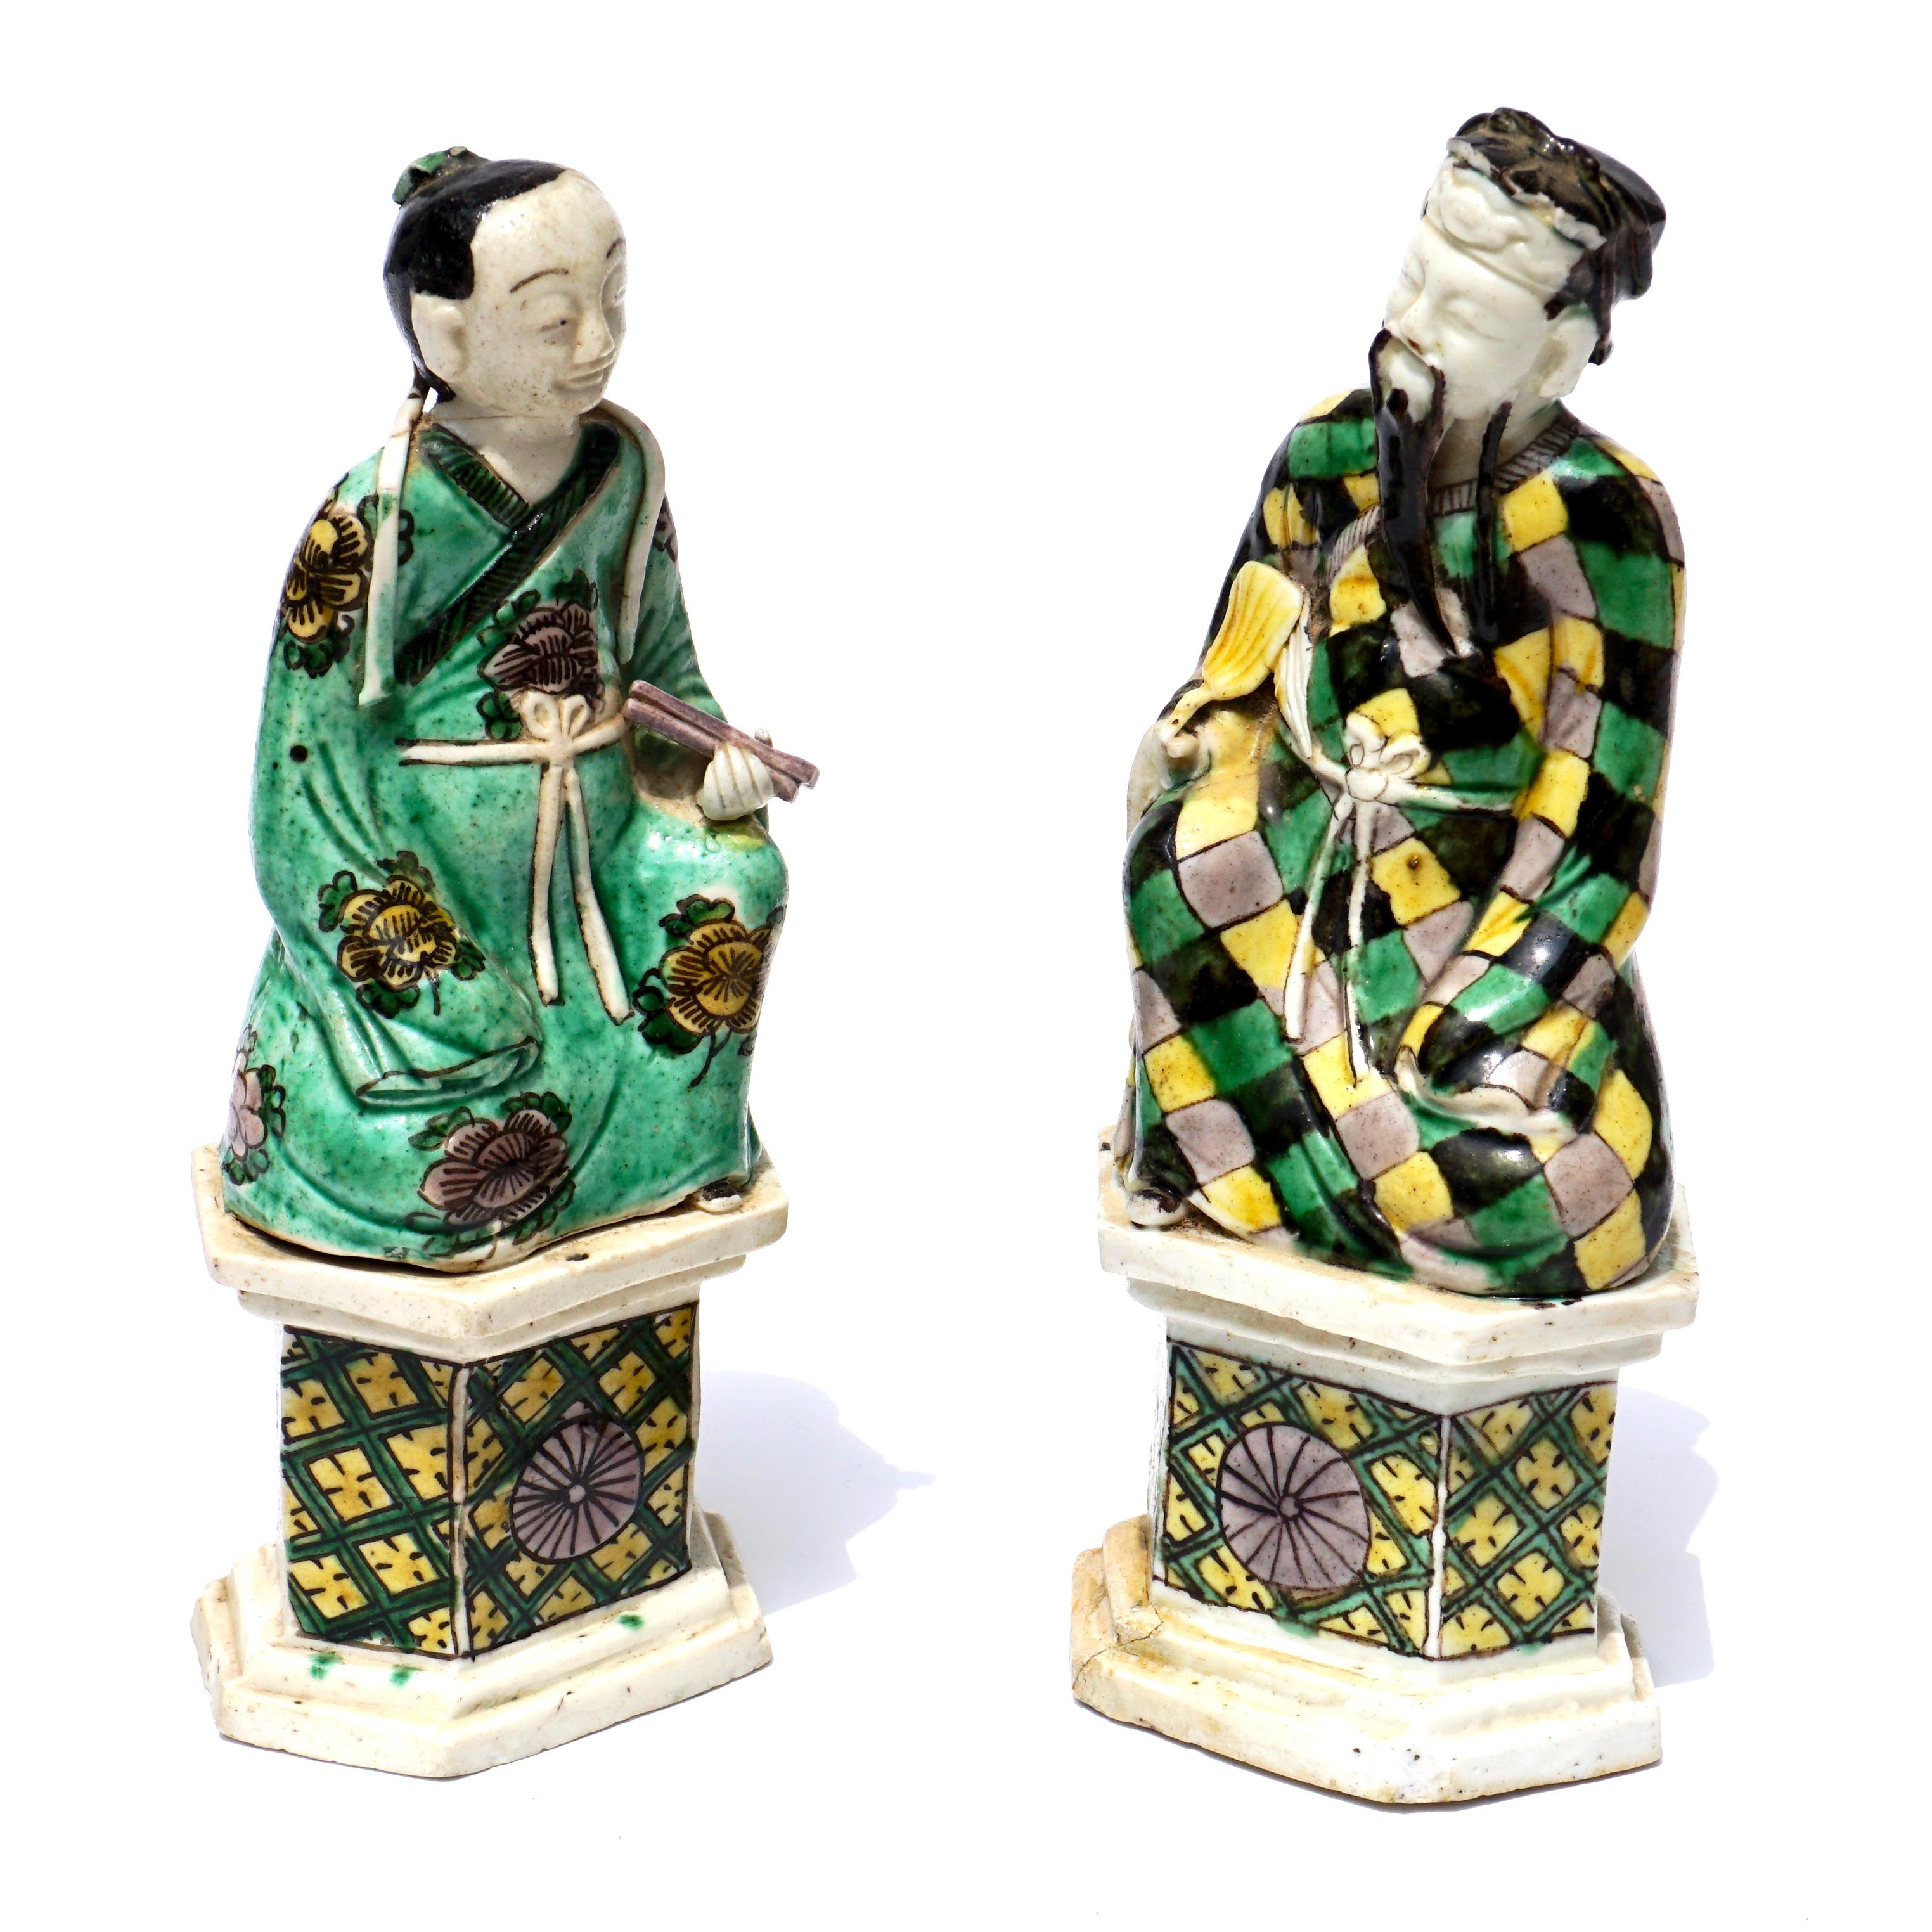 Two Chinese Famille Verte figures of the Immortals Zhong Li Quan and Lan Cai He, Kangxi, coloured with green, yellow, black and aubergine glazes, raised on hexagonal bases, Zhong Li Quan holding his fan and Lan Cai He with castanets, with Radcliffe